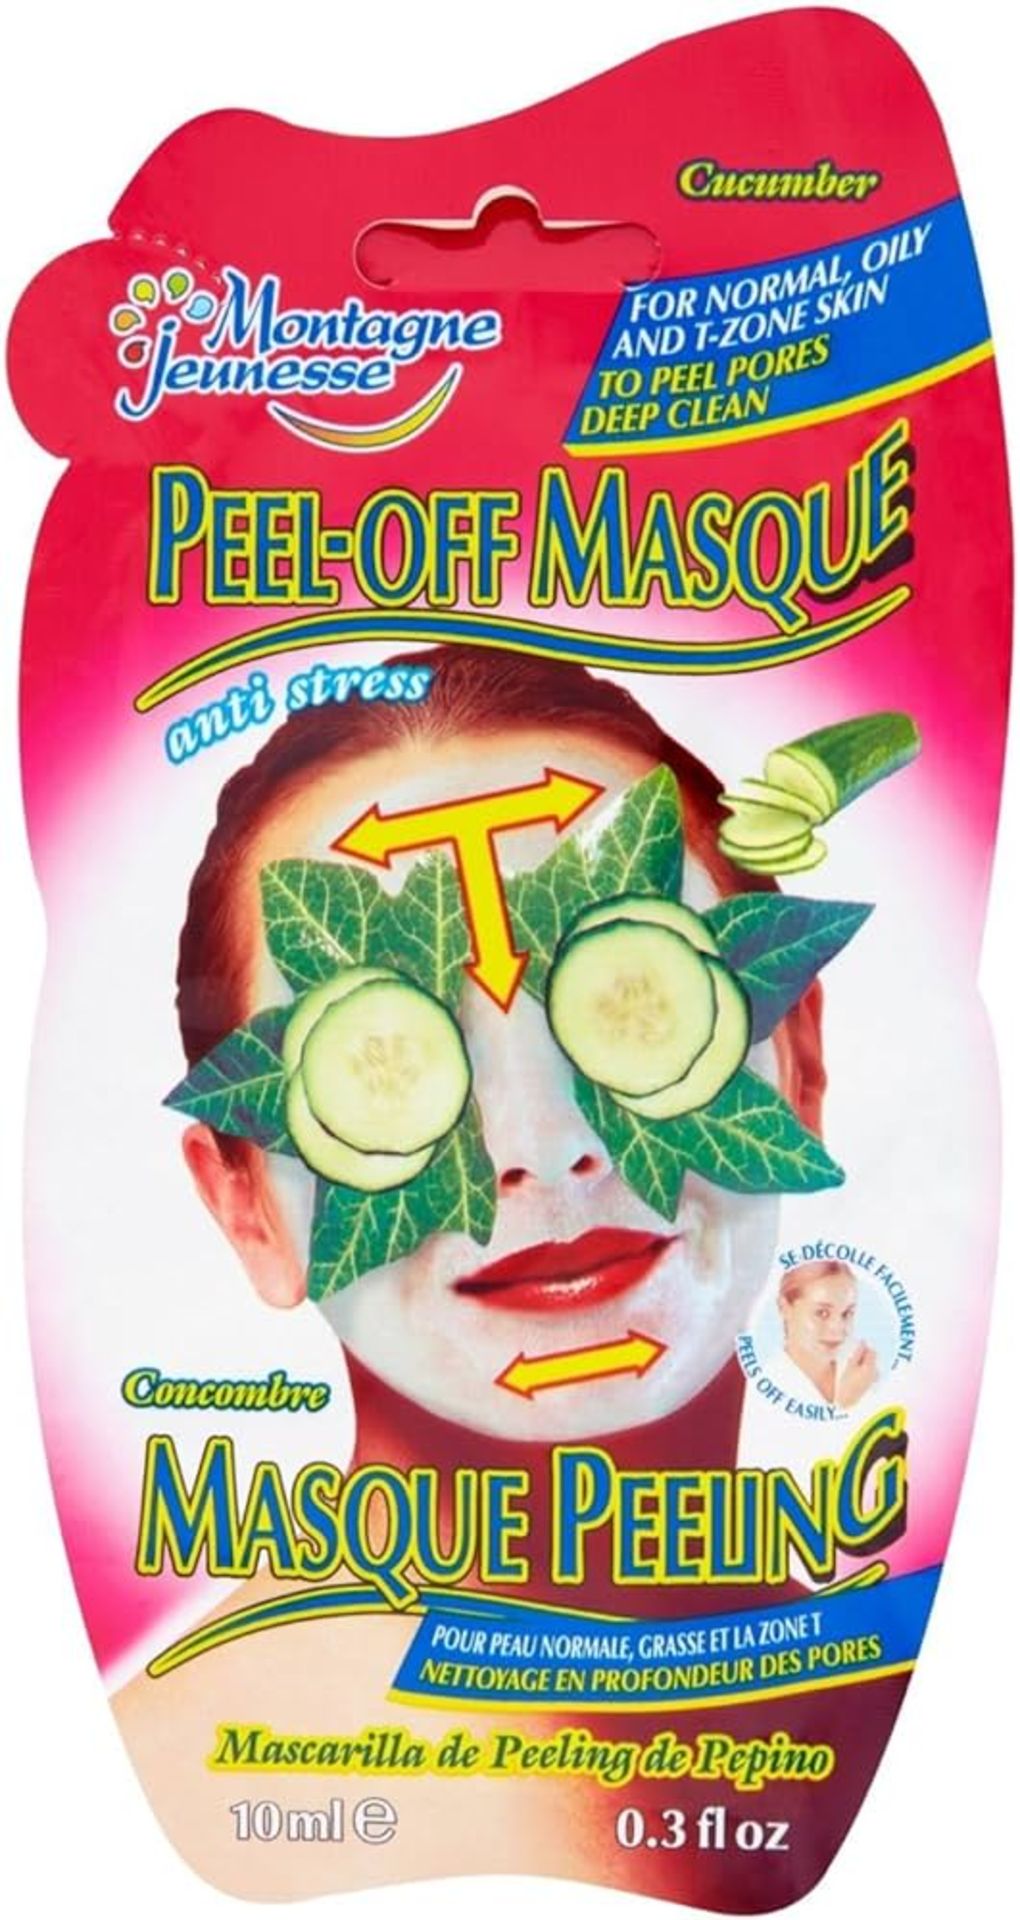 Bulk Trade Lot 2,000 x Montagne Jeunesse Face Masks. RRPs Vary from £2.50 - £6. This lot has a RRP - Image 10 of 16